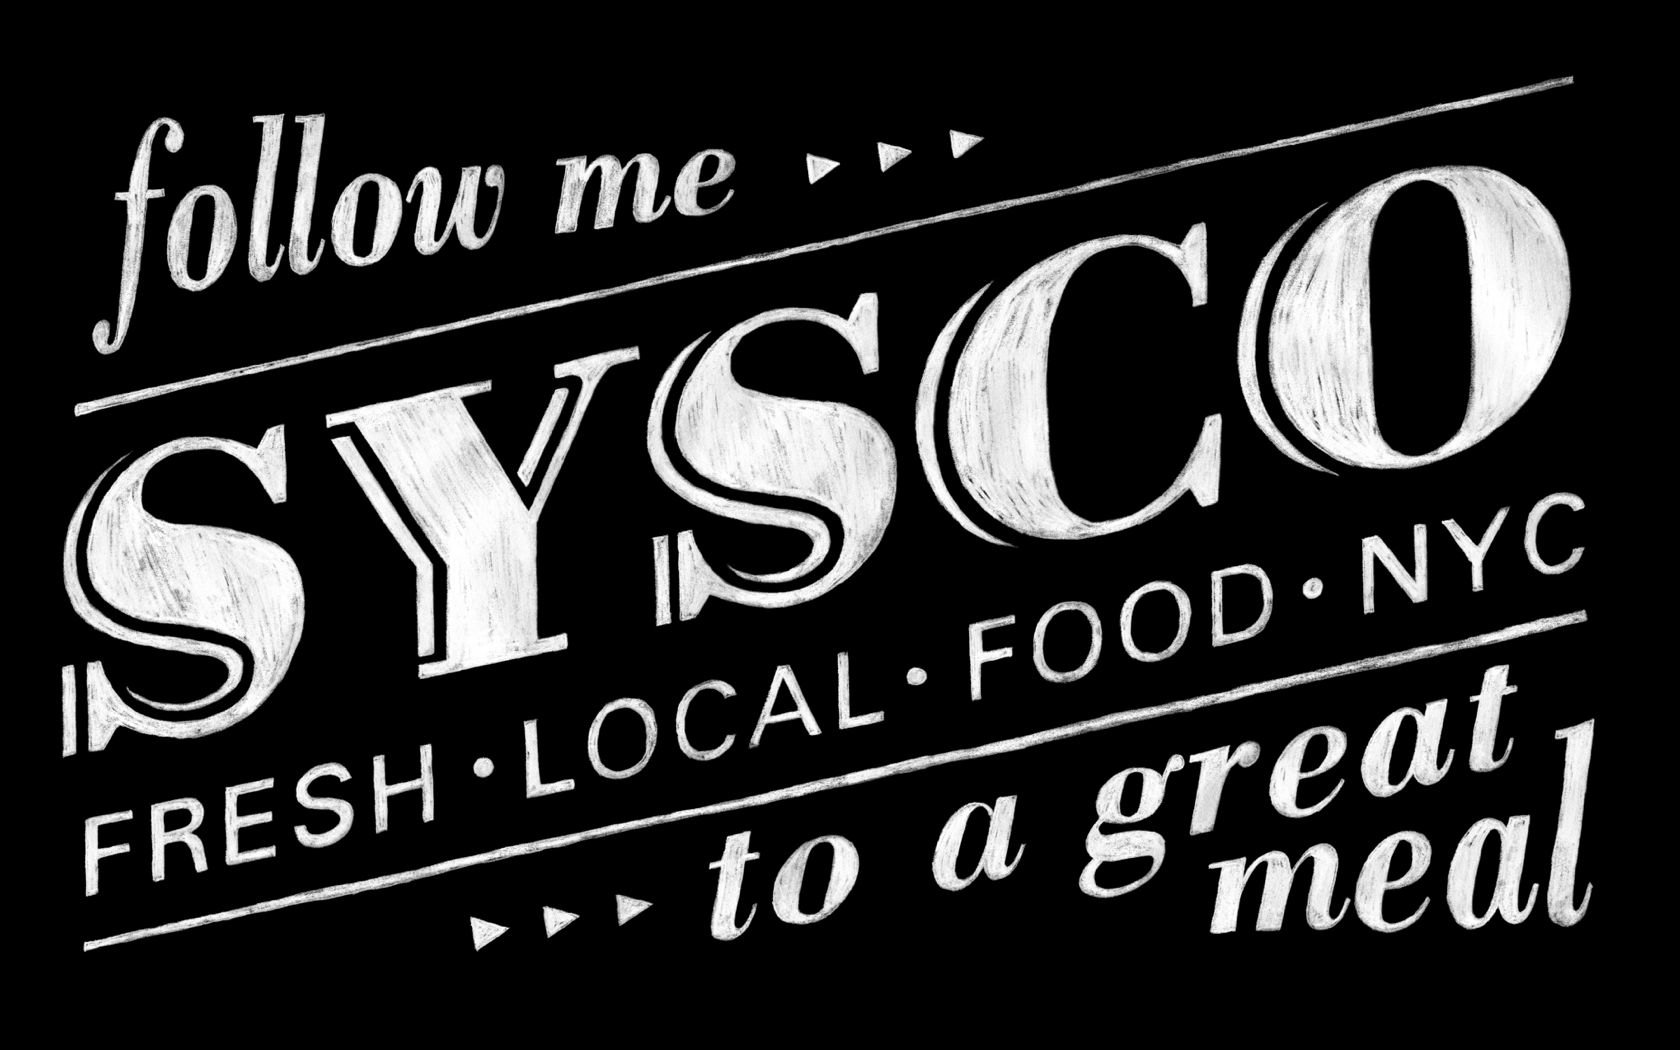 Trademark Logo FOLLOW ME SYSCO FRESH LOCAL FOOD NYC TO A GREAT MEAL